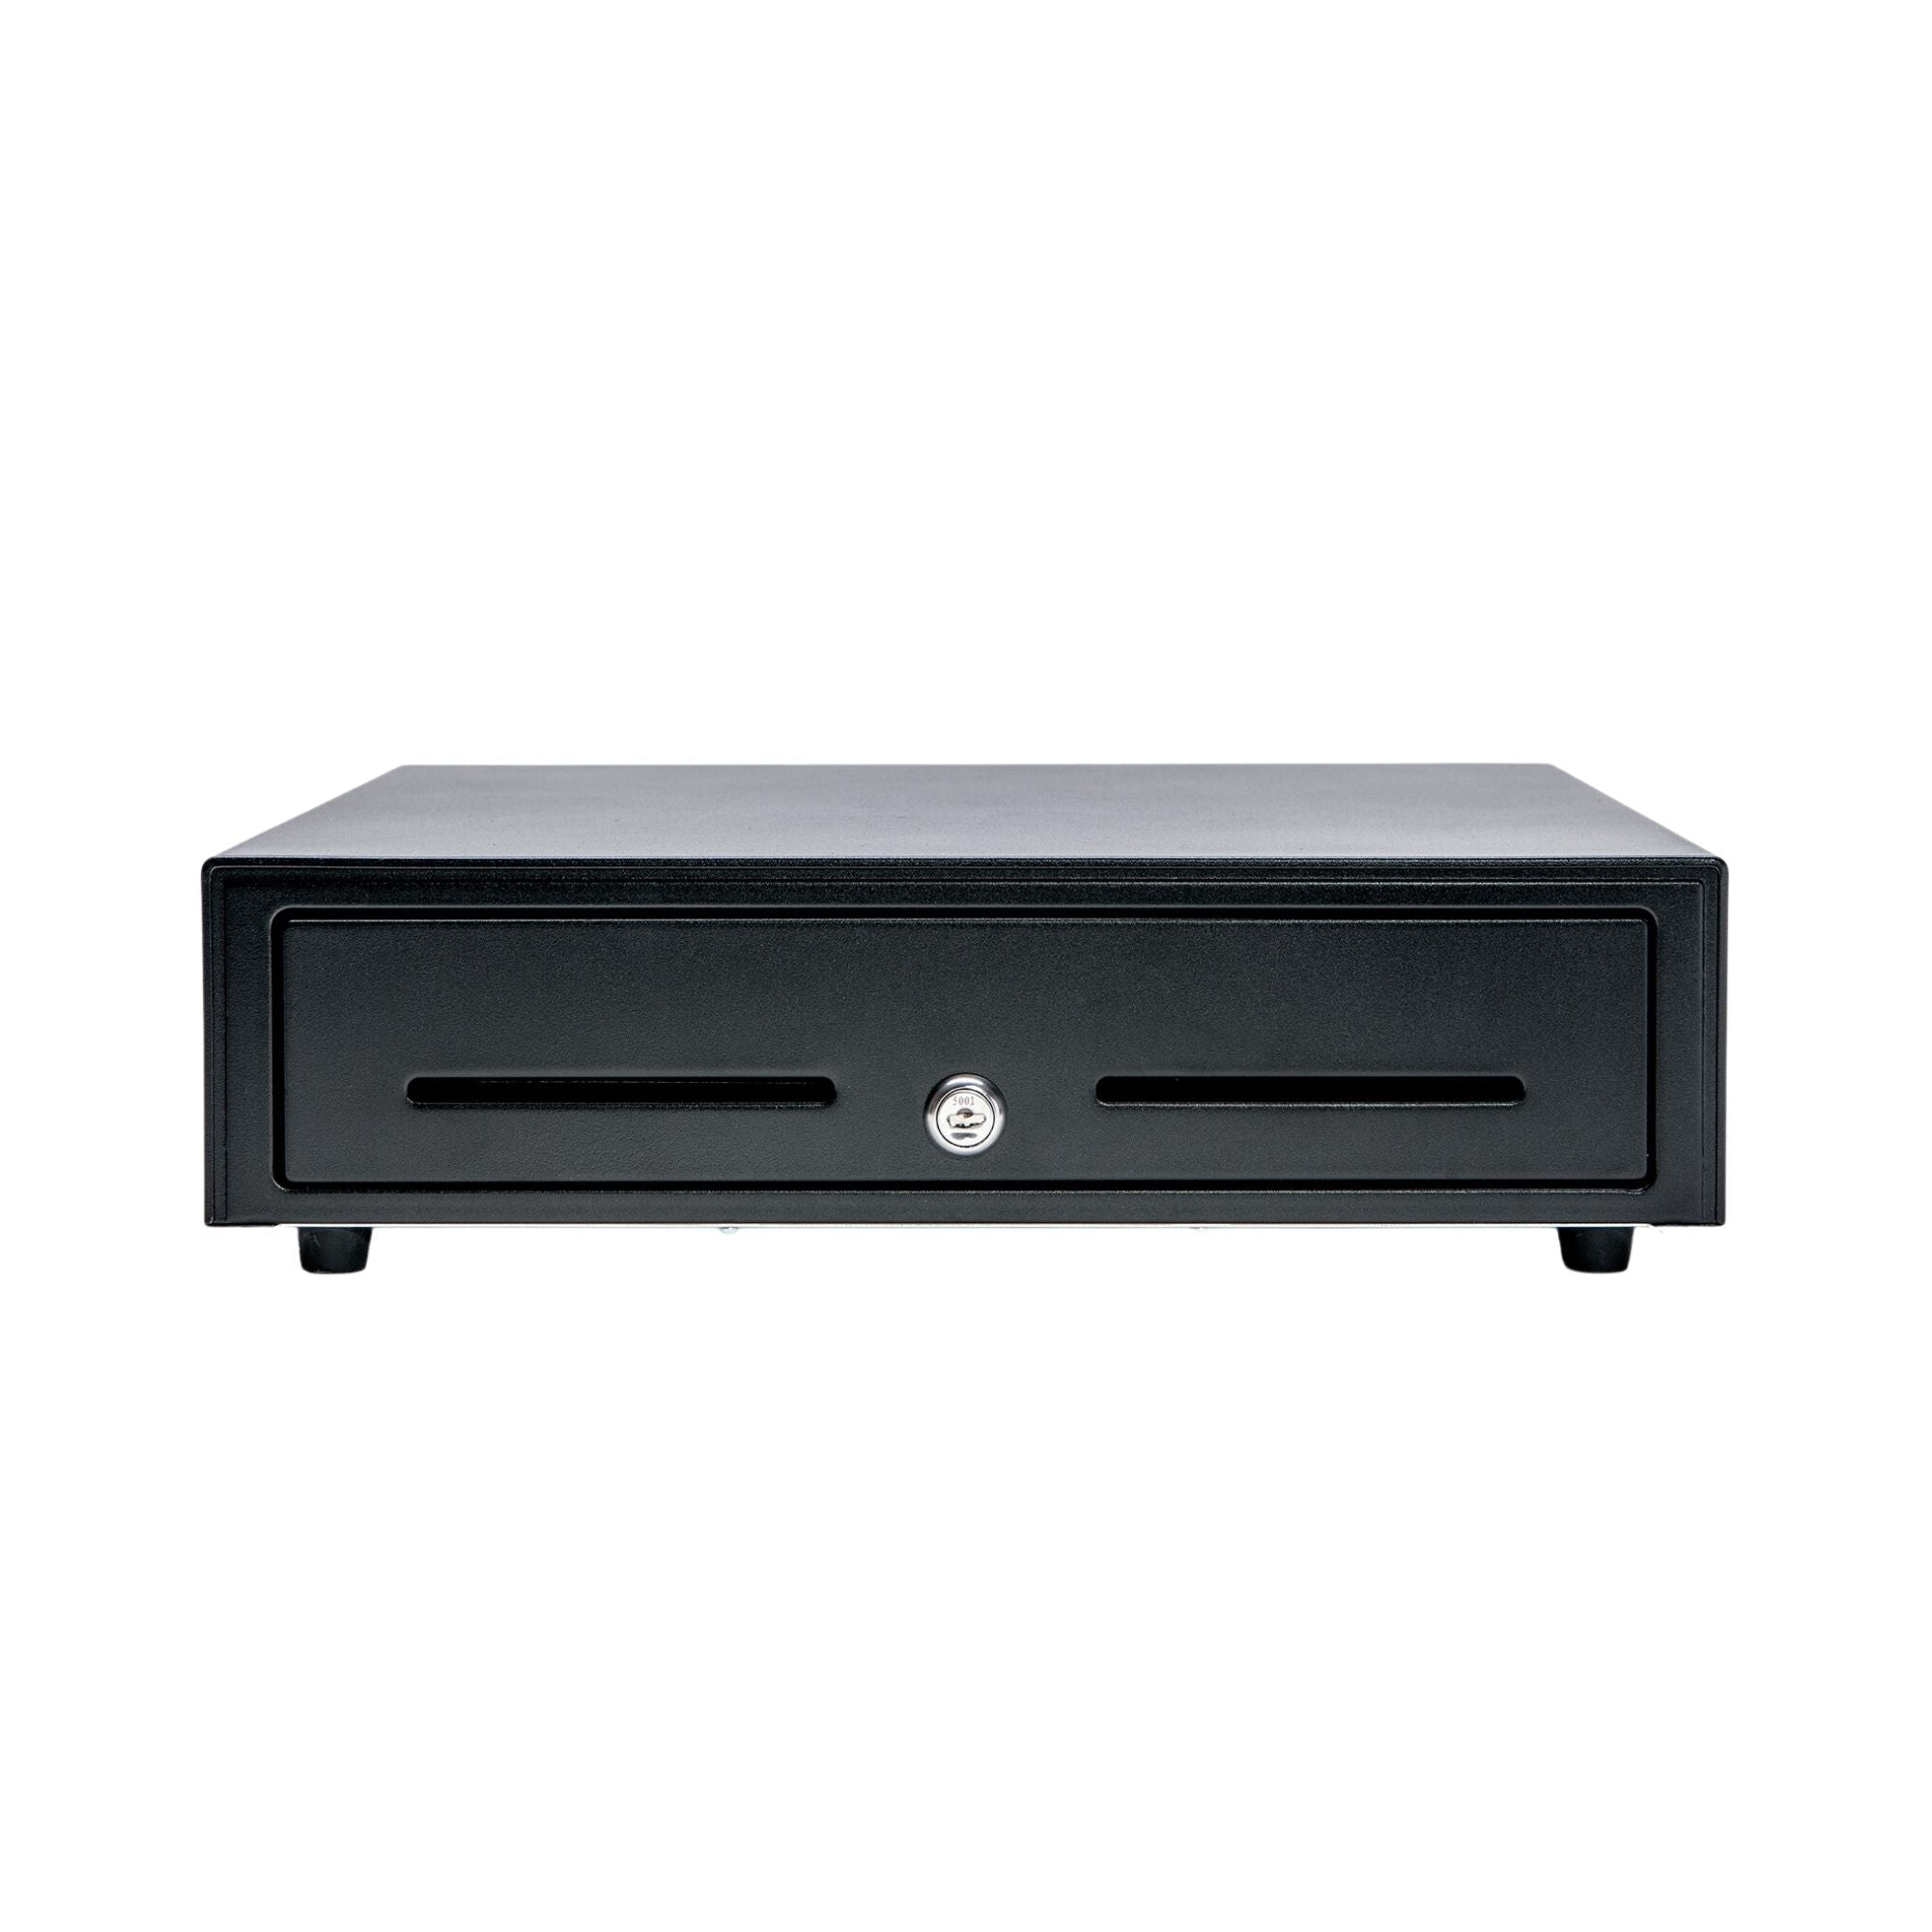 Star Micronics 37965580 CD3-1616BKC48-S2 Cash Drawer Black 16Wx16D 4Bill-8Coin for Canada